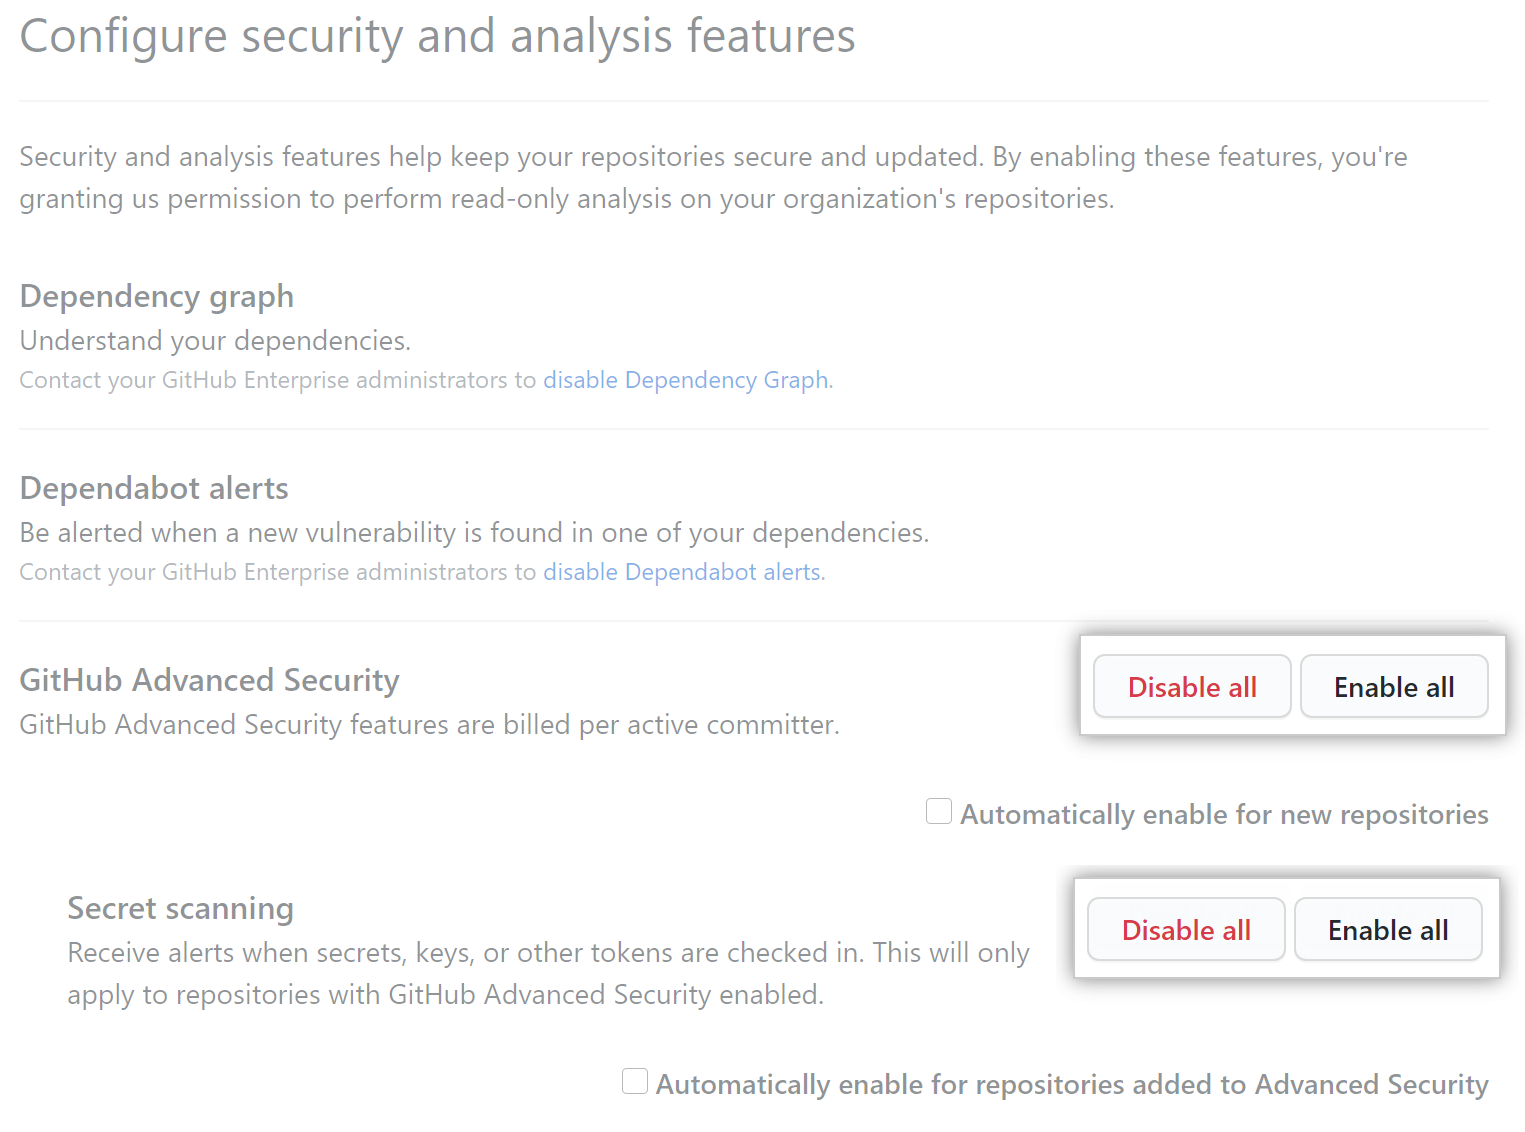 "Enable all" or "Disable all" button for "Configure security and analysis" features